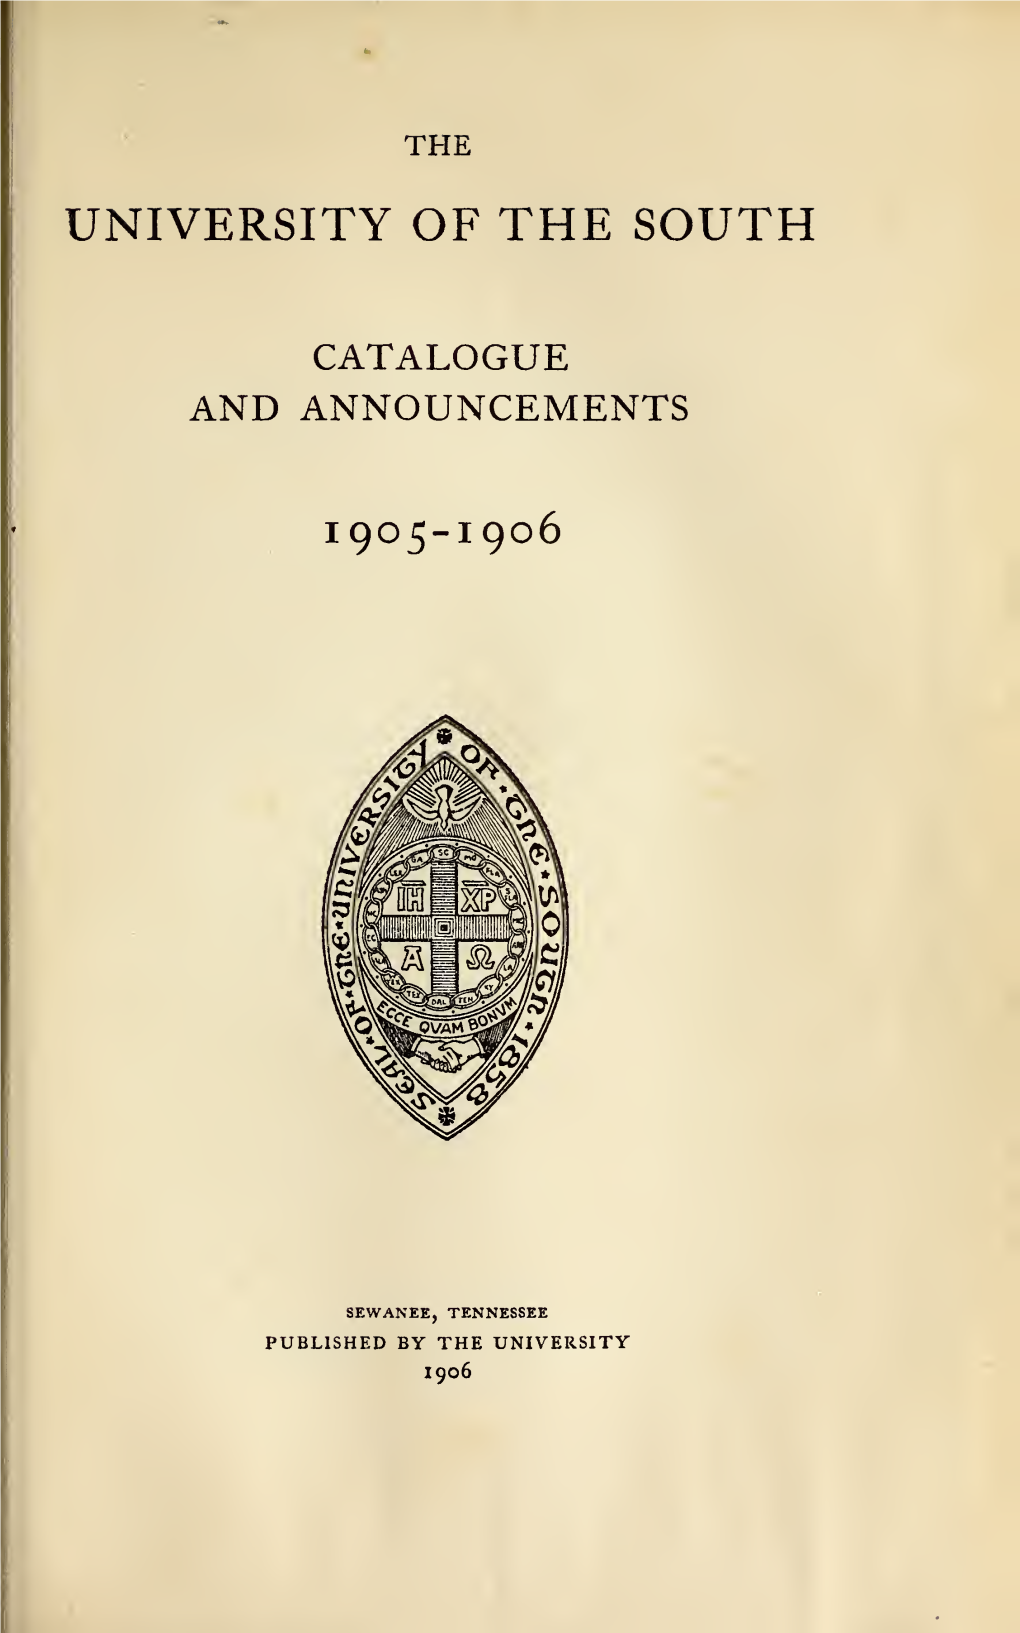 College of Arts and Sciences Catalog and Announcements, 1902-1906